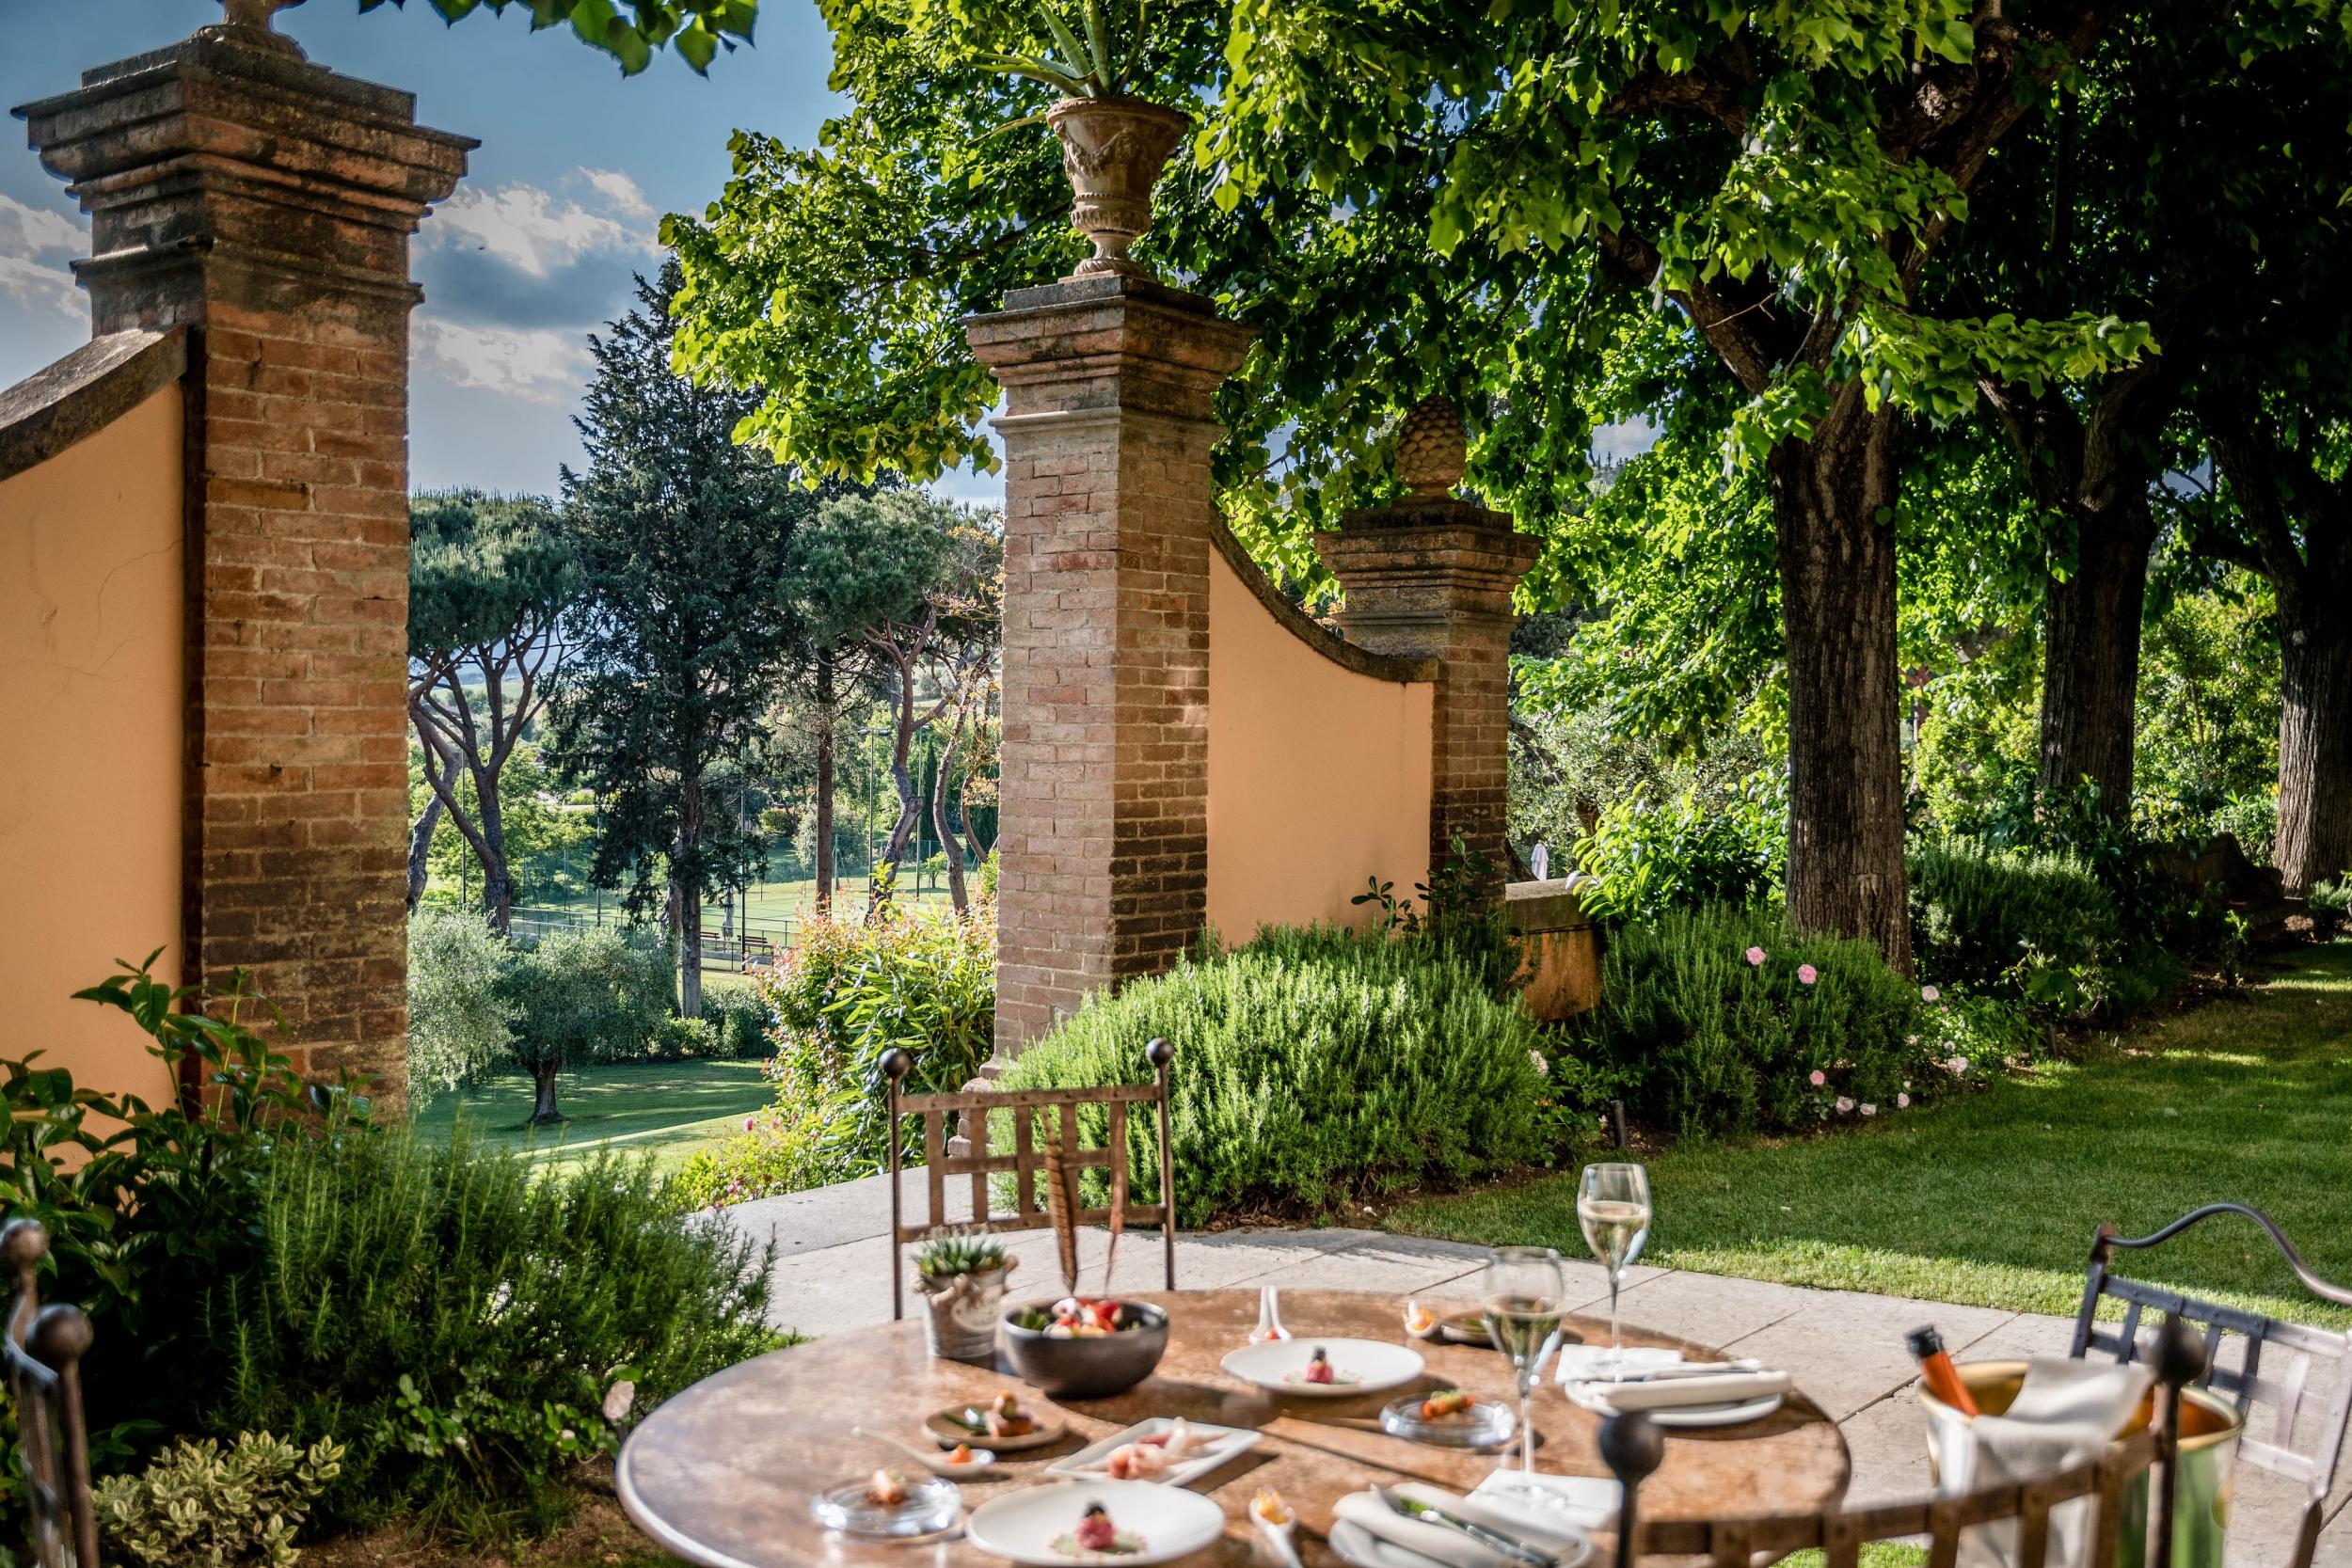 A Tuscan getaway is among the prizes on offer (Gianni Buonsante)